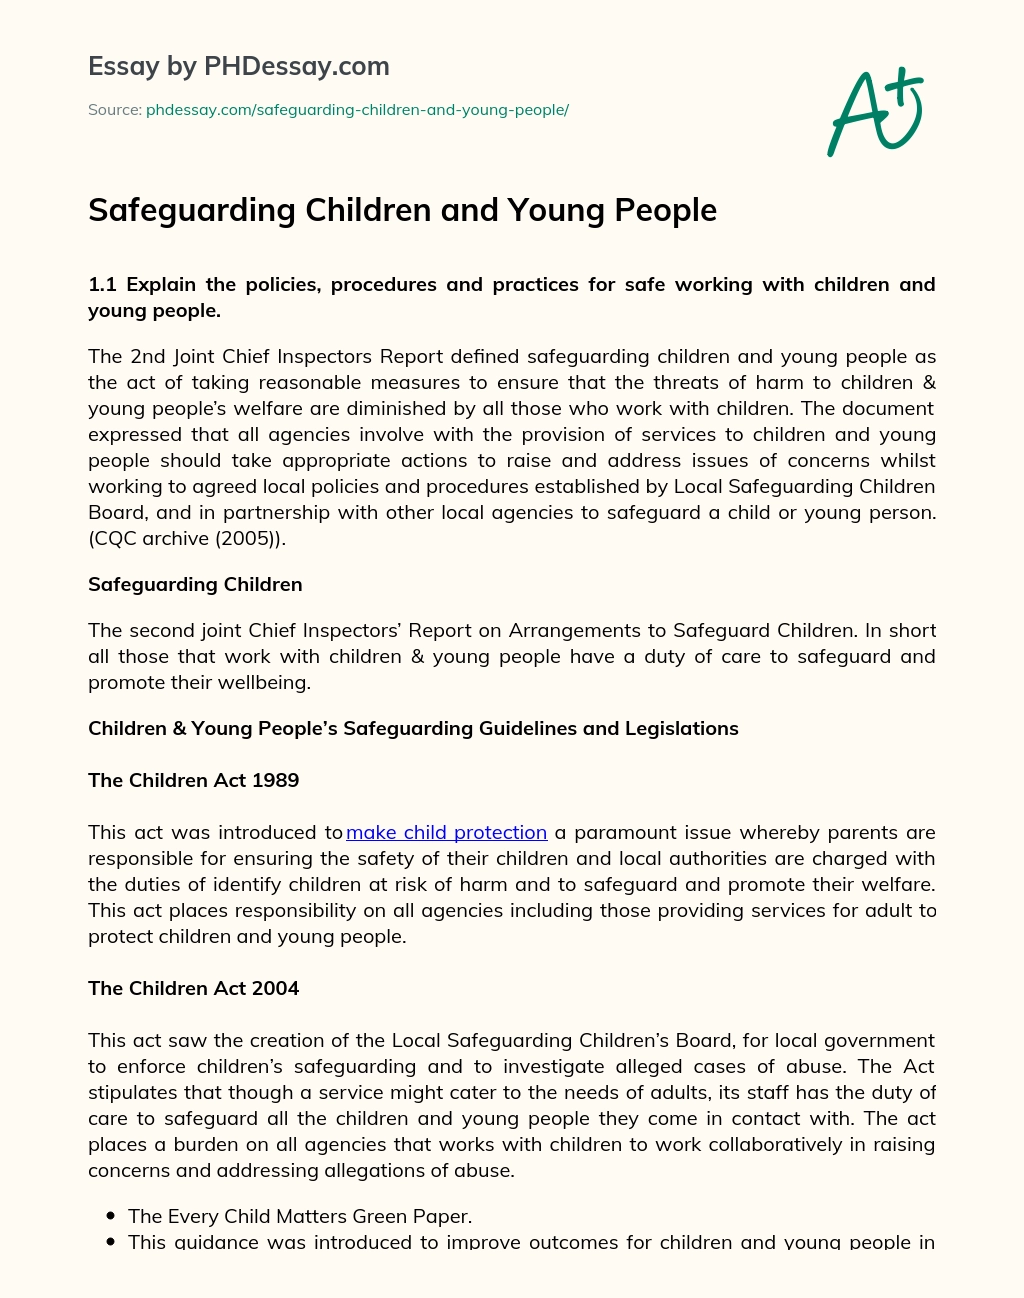 Safeguarding Children and Young People essay